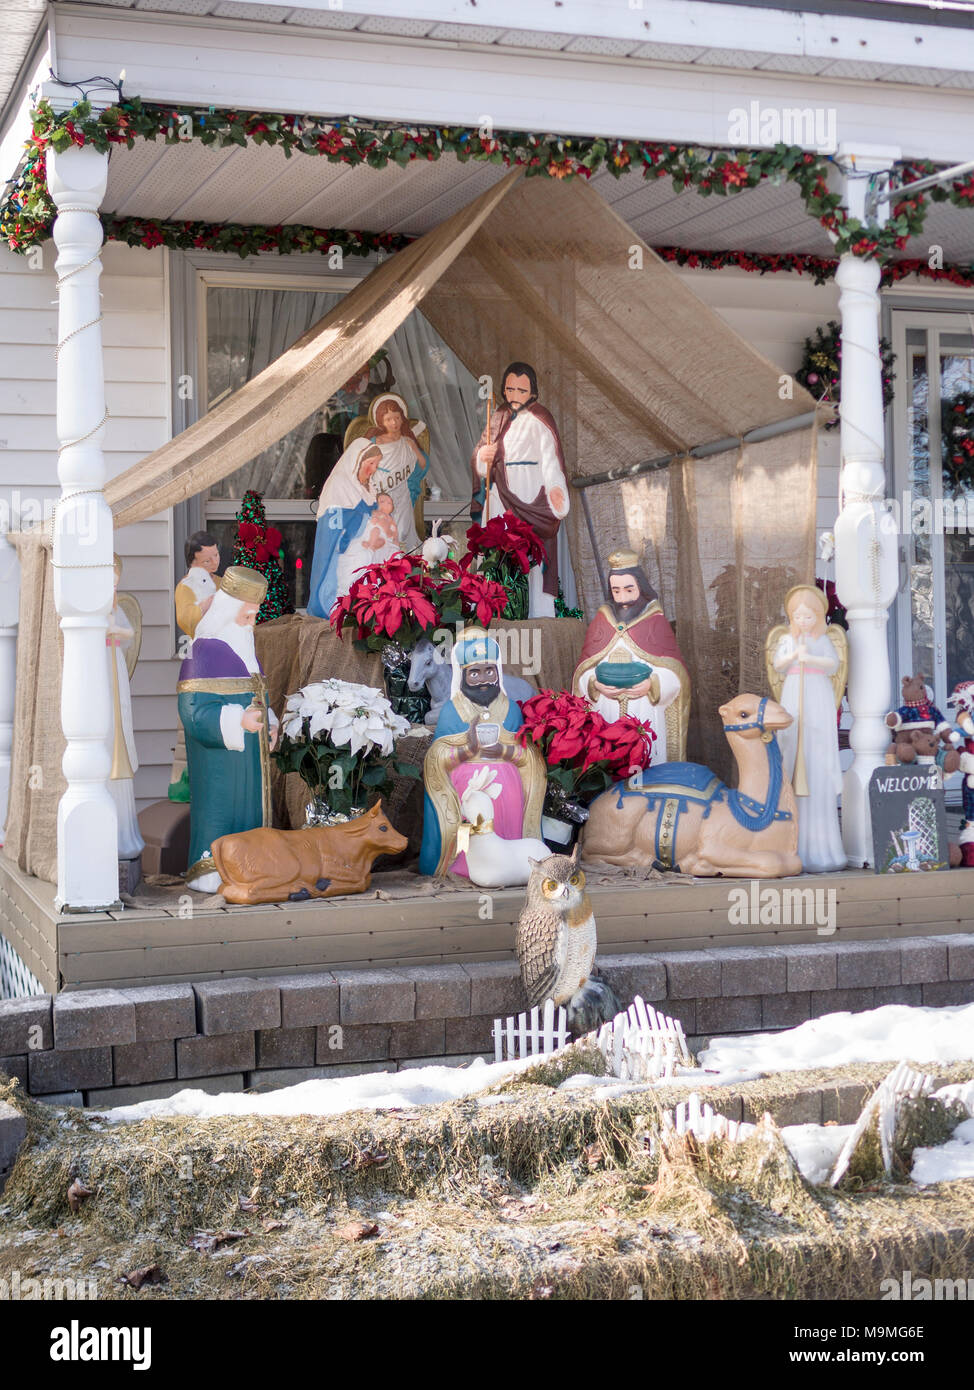 Front Porch Nativity Scene: A complex nativity scene with 3 kings, animals and other Christmas decorations cover the front portch of an Ottawa house in Little Italy. Stock Photo